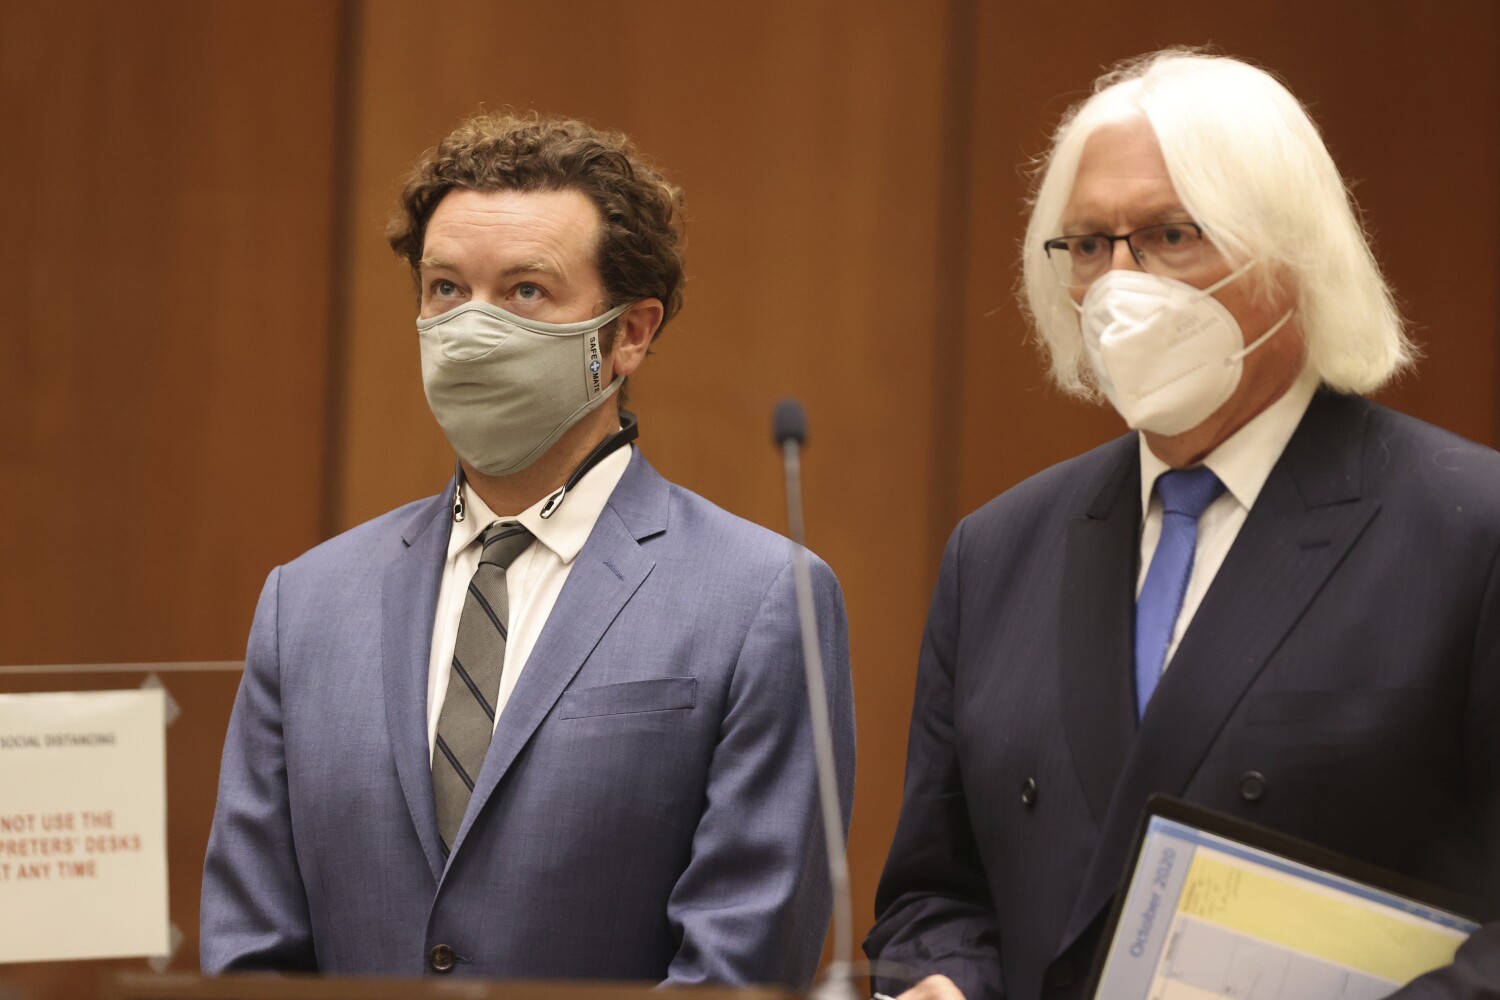 Attorney for actor Danny Masterson alleges rape charges are politically motivated